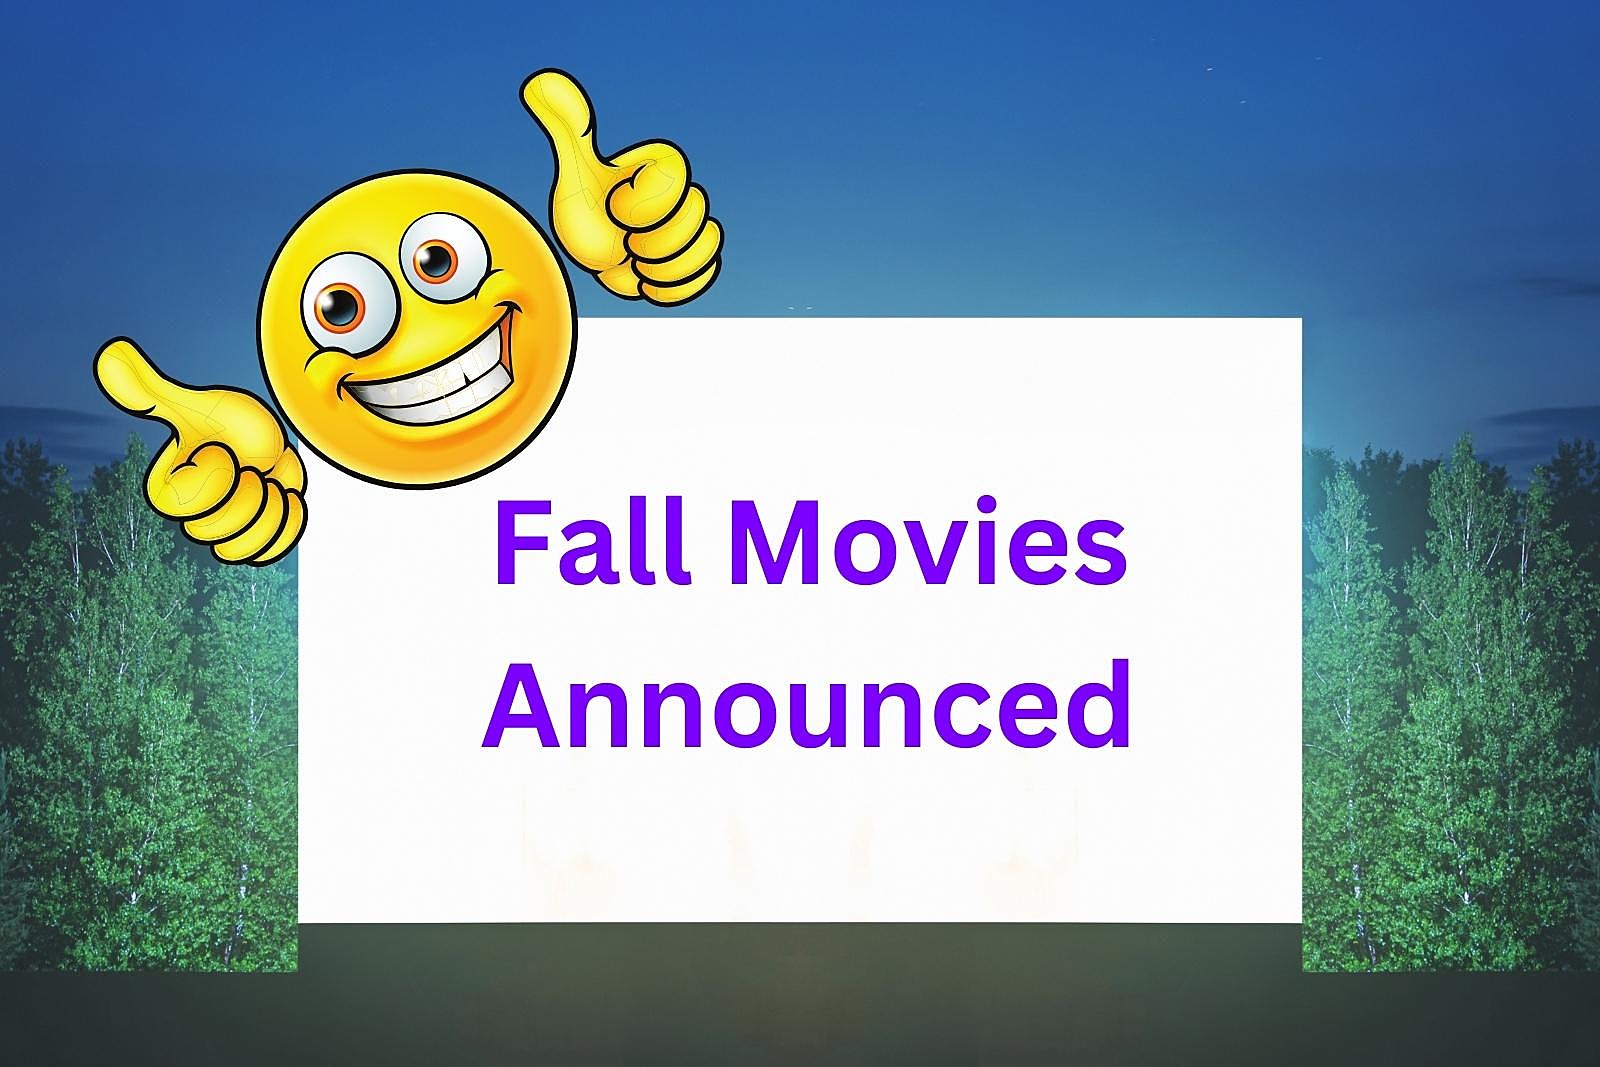 Enjoy Free Movies in The Park at Spring Lake Park This Fall